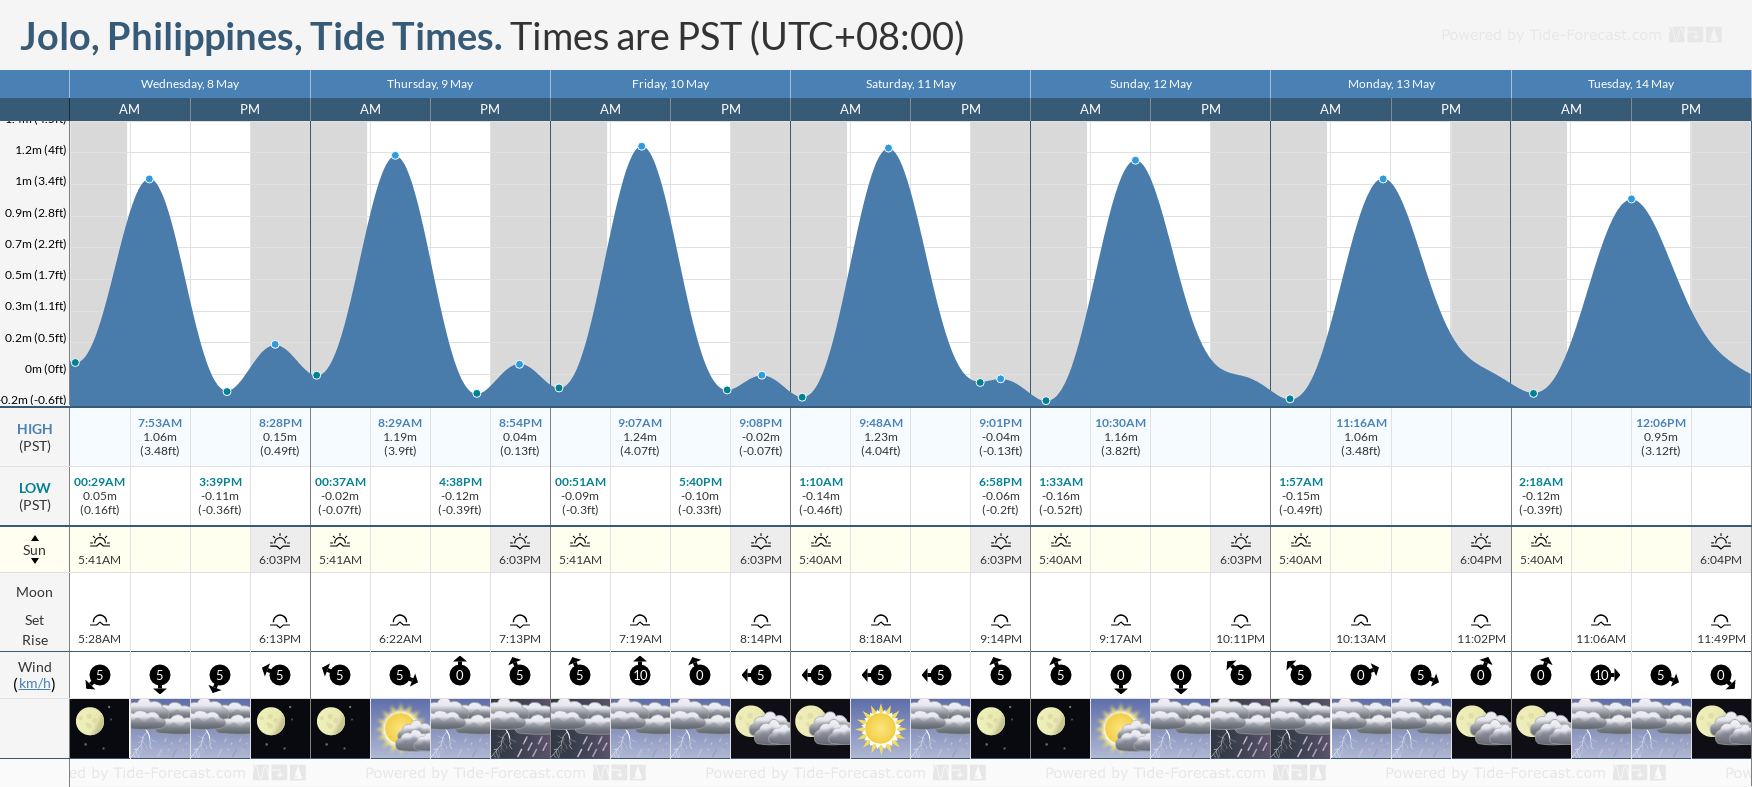 Jolo, Philippines Tide Chart including high and low tide tide times for the next 7 days